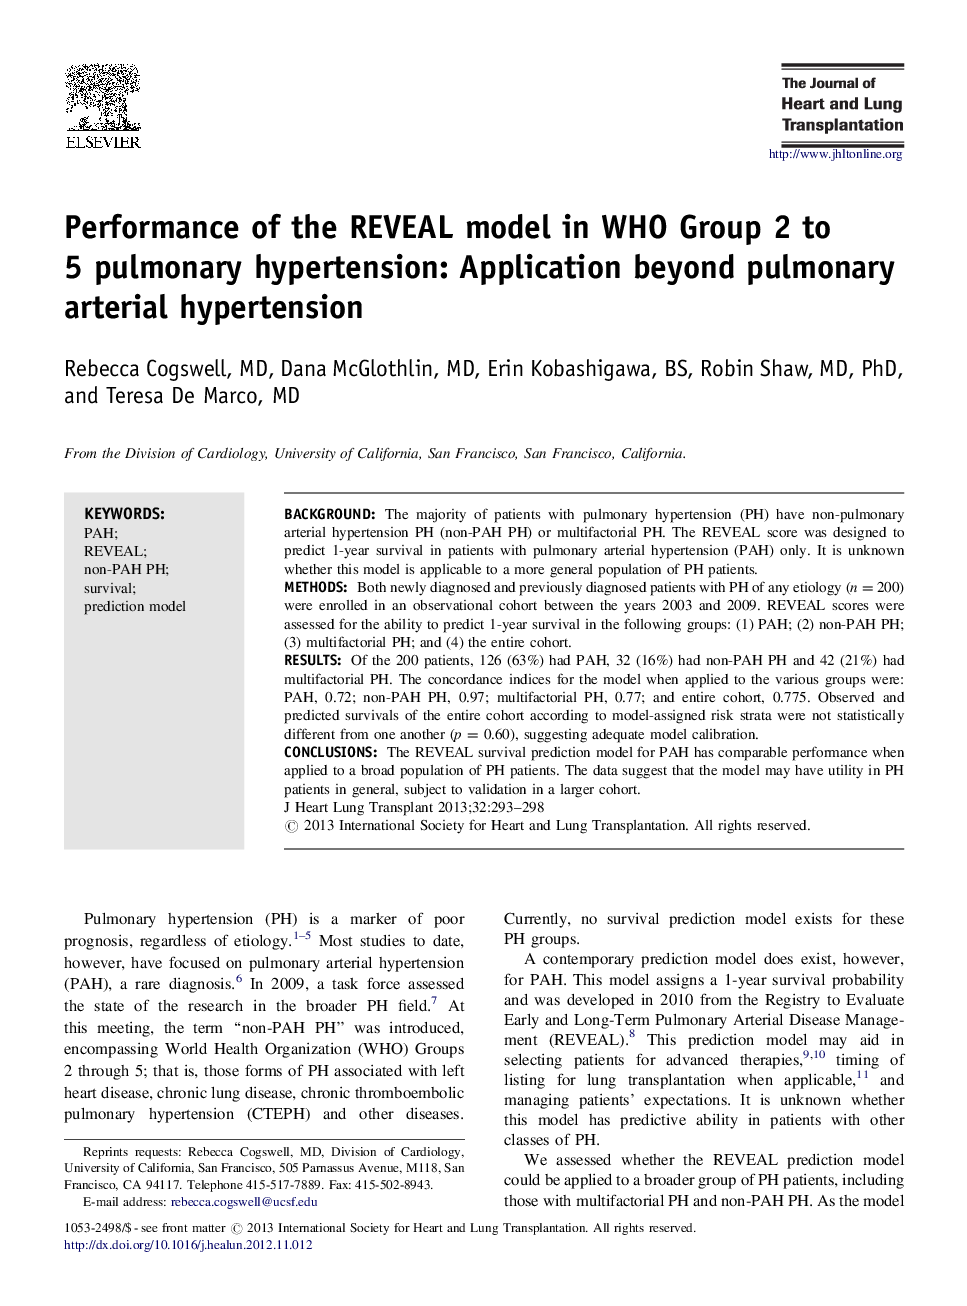 Performance of the REVEAL model in WHO Group 2 to 5 pulmonary hypertension: Application beyond pulmonary arterial hypertension